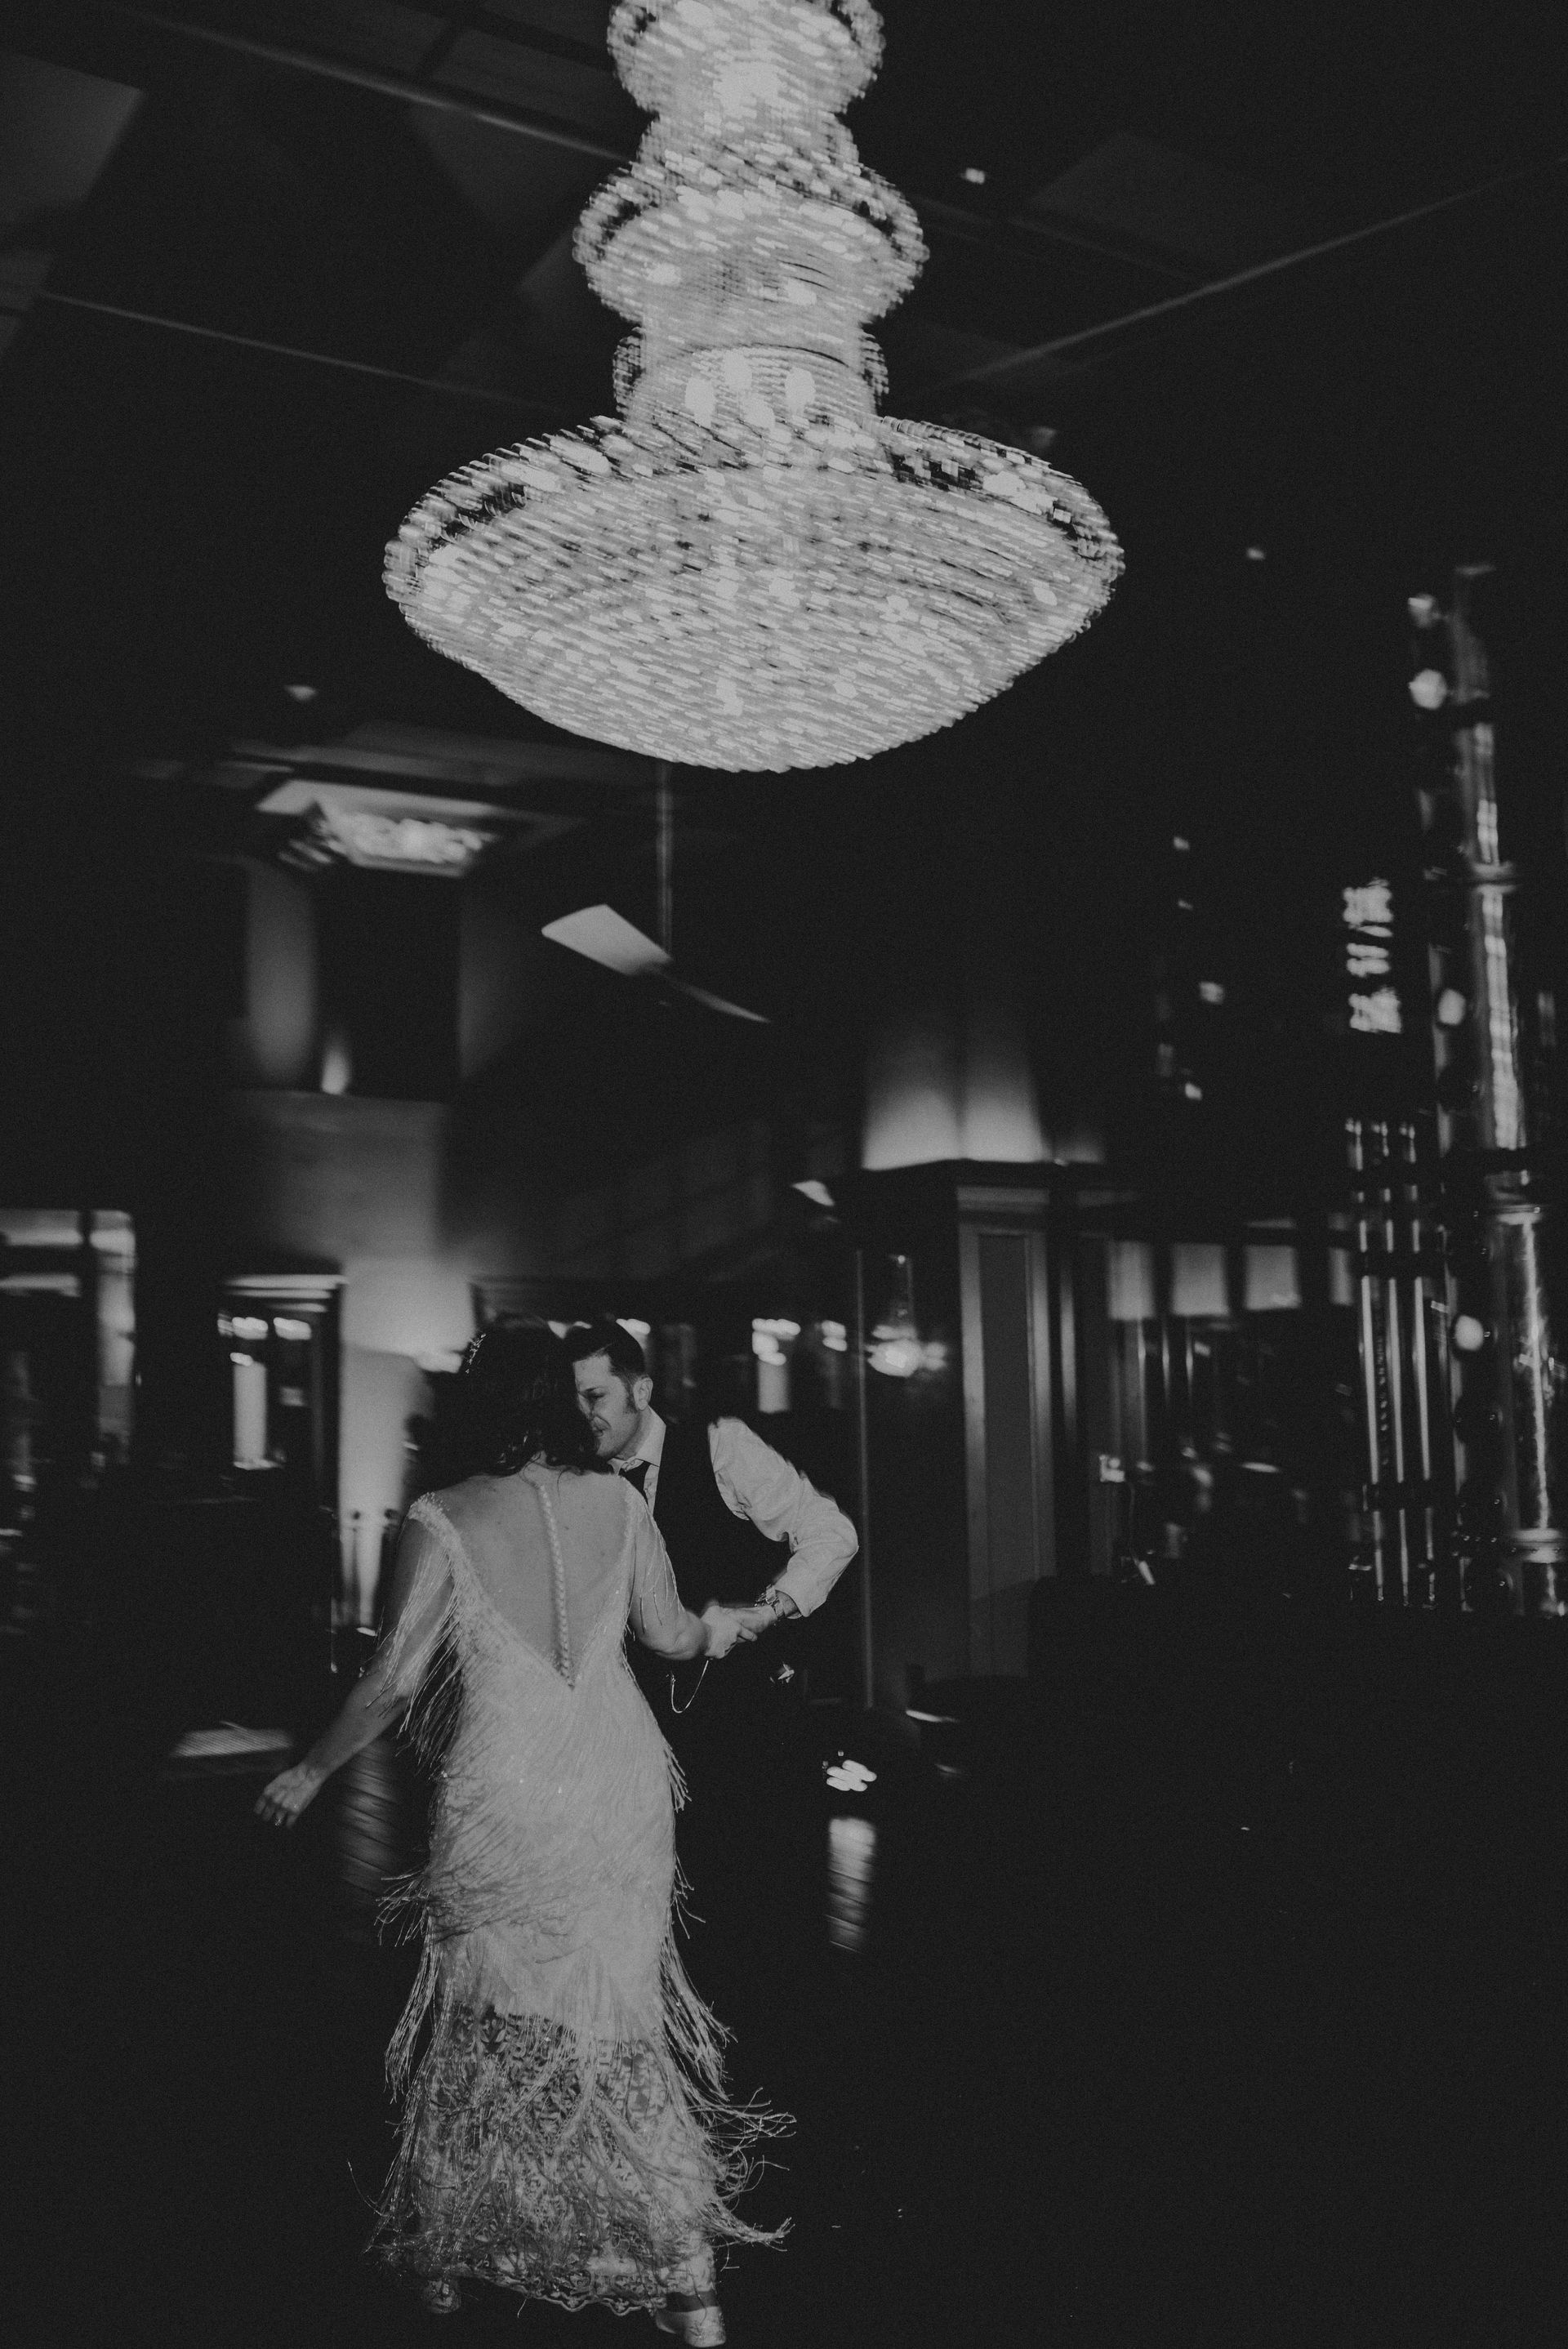 a black and white photo of a bride and groom dancing under a chandelier